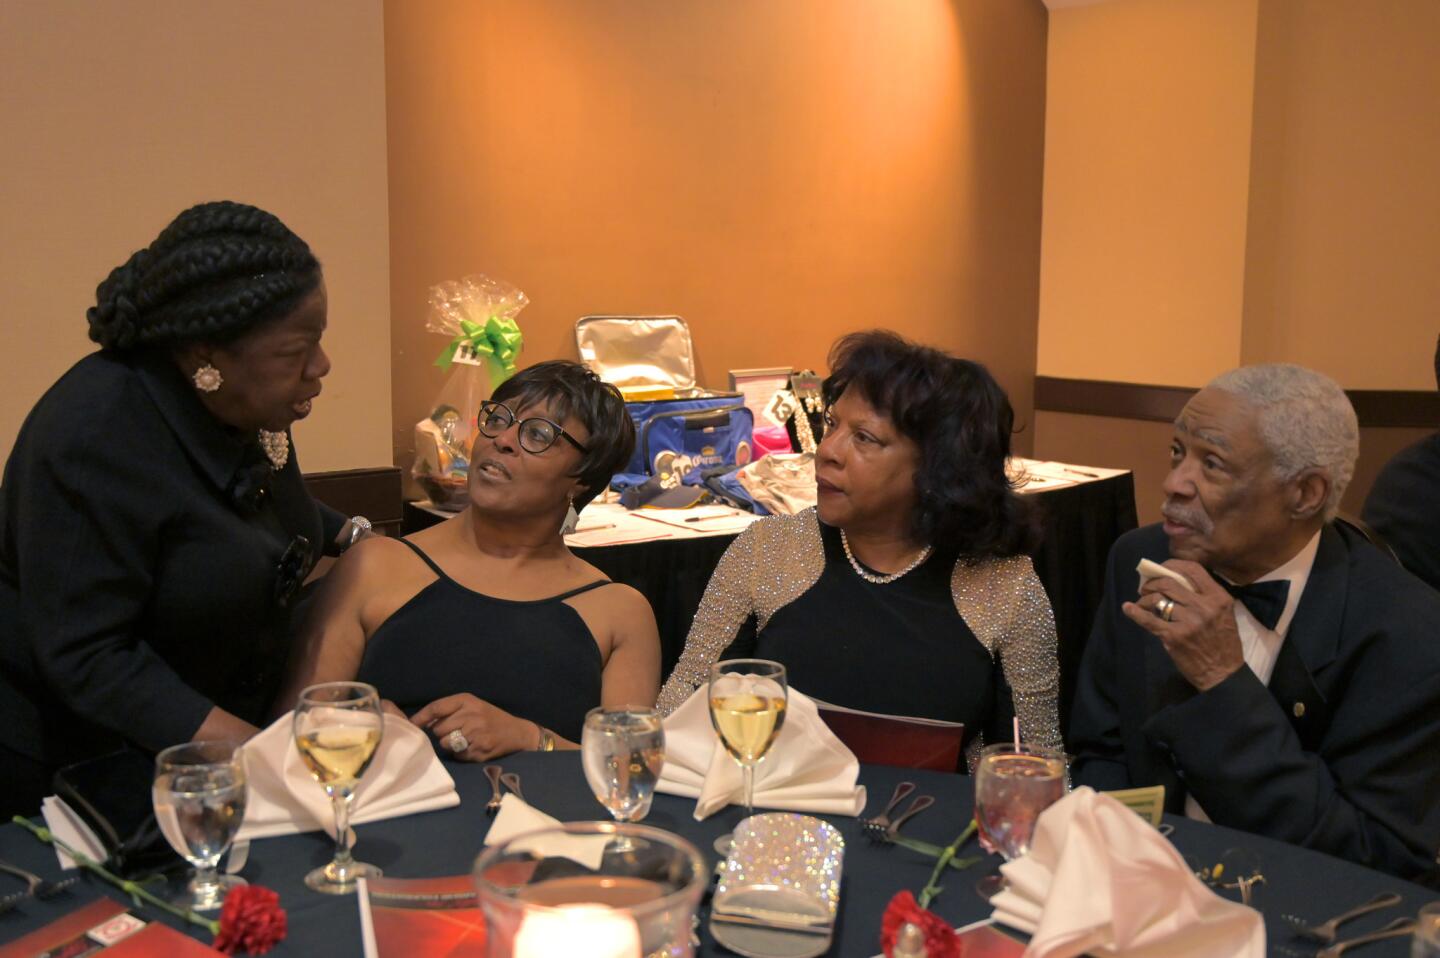 Mae A. Beale, Christine Fields, Regina Cook, and Stephen Cook at the Kappa Alpha Psi Scholarship Foundation of Columbia's Black & White Soirée.